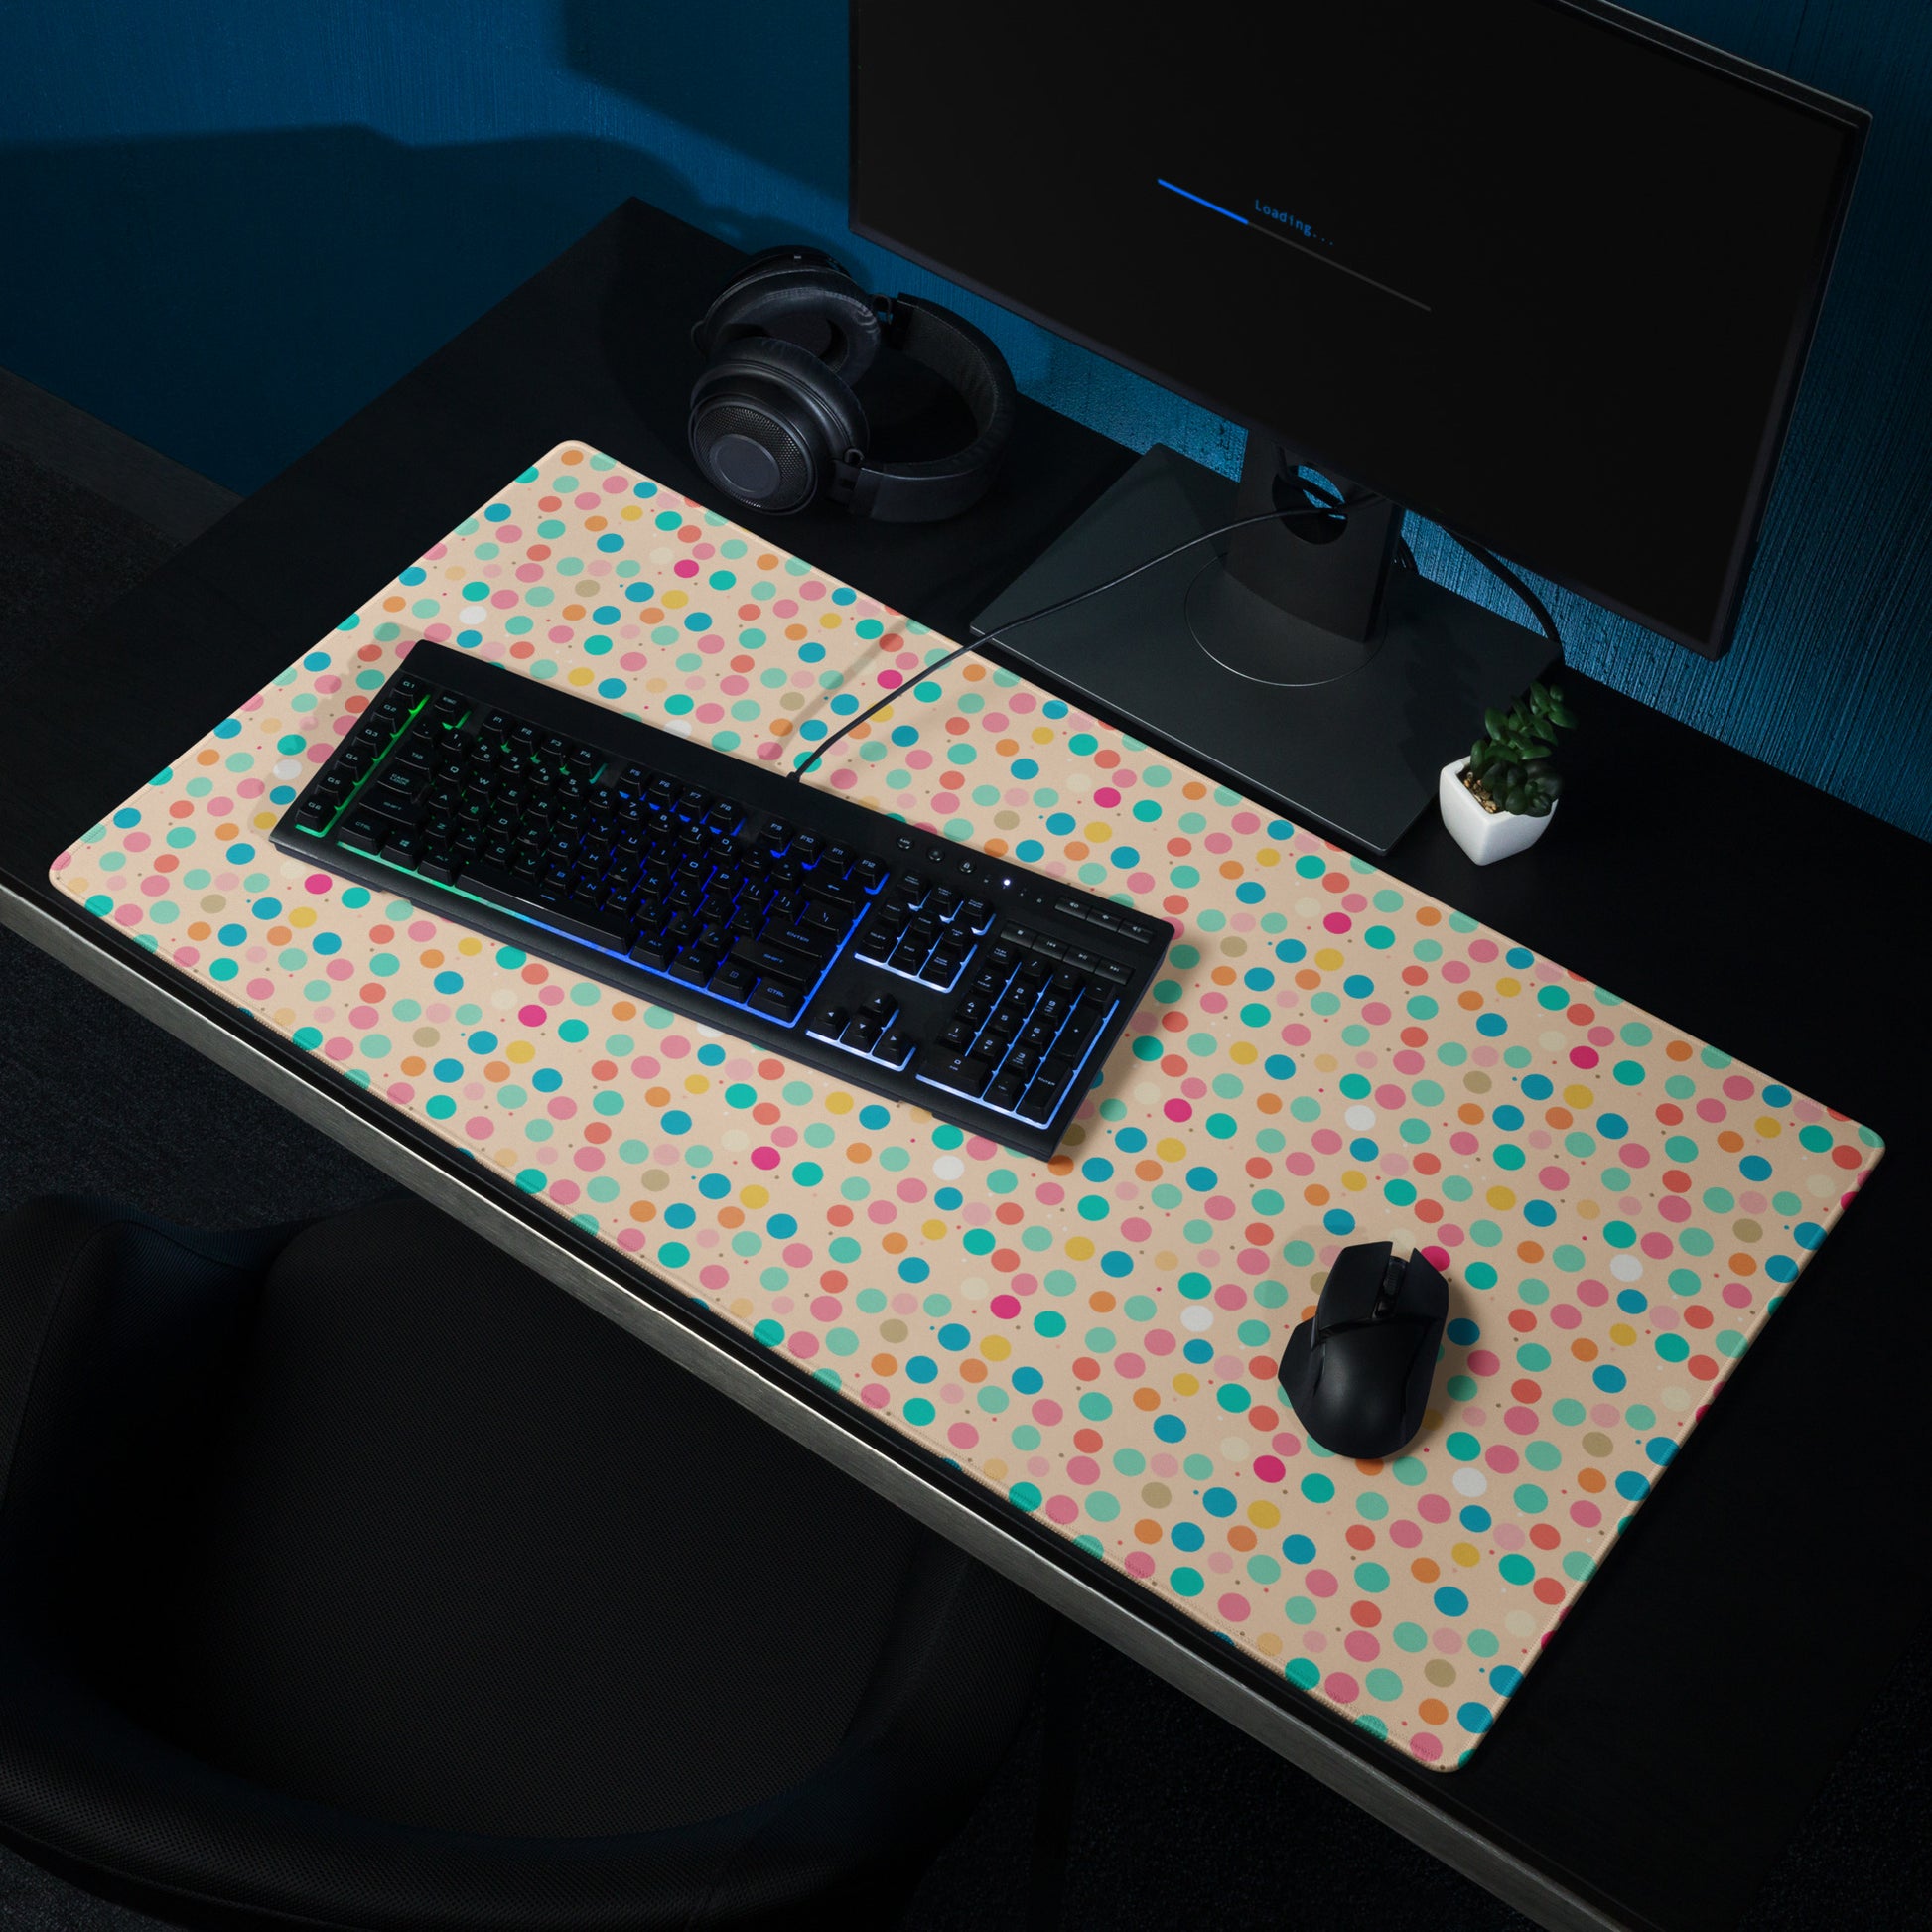 A 36" x 18" desk pad with a colorful polka dot pattern sitting on a desk.